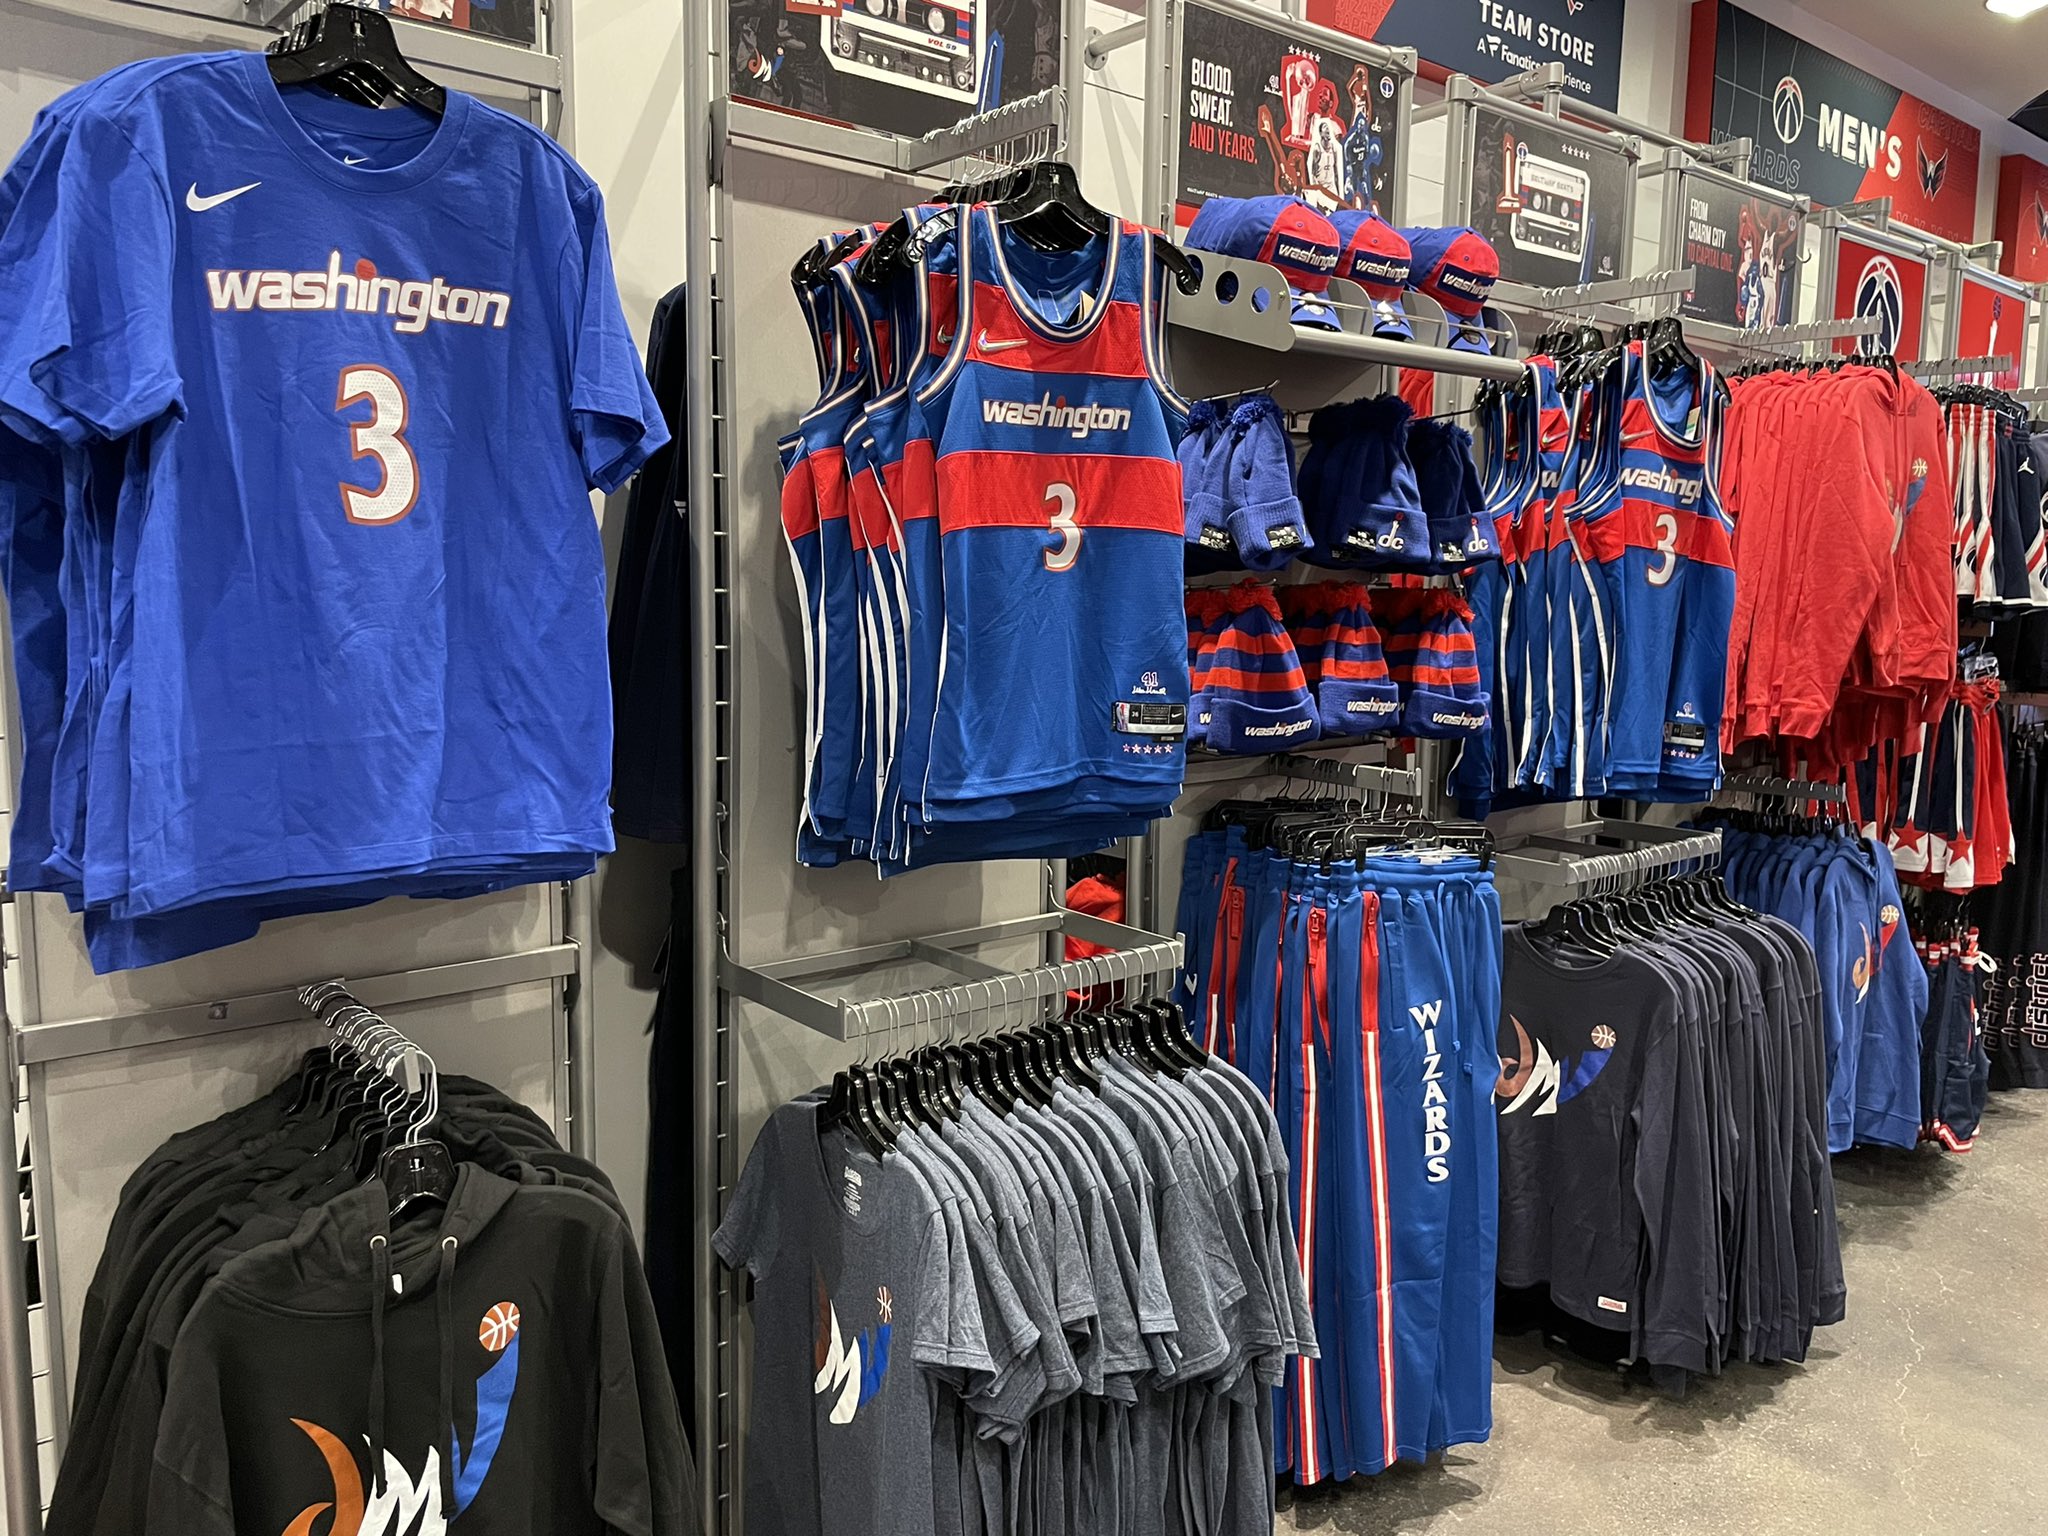 Team Store Capital One Arena (@teamshopatcoa) • Instagram photos and videos